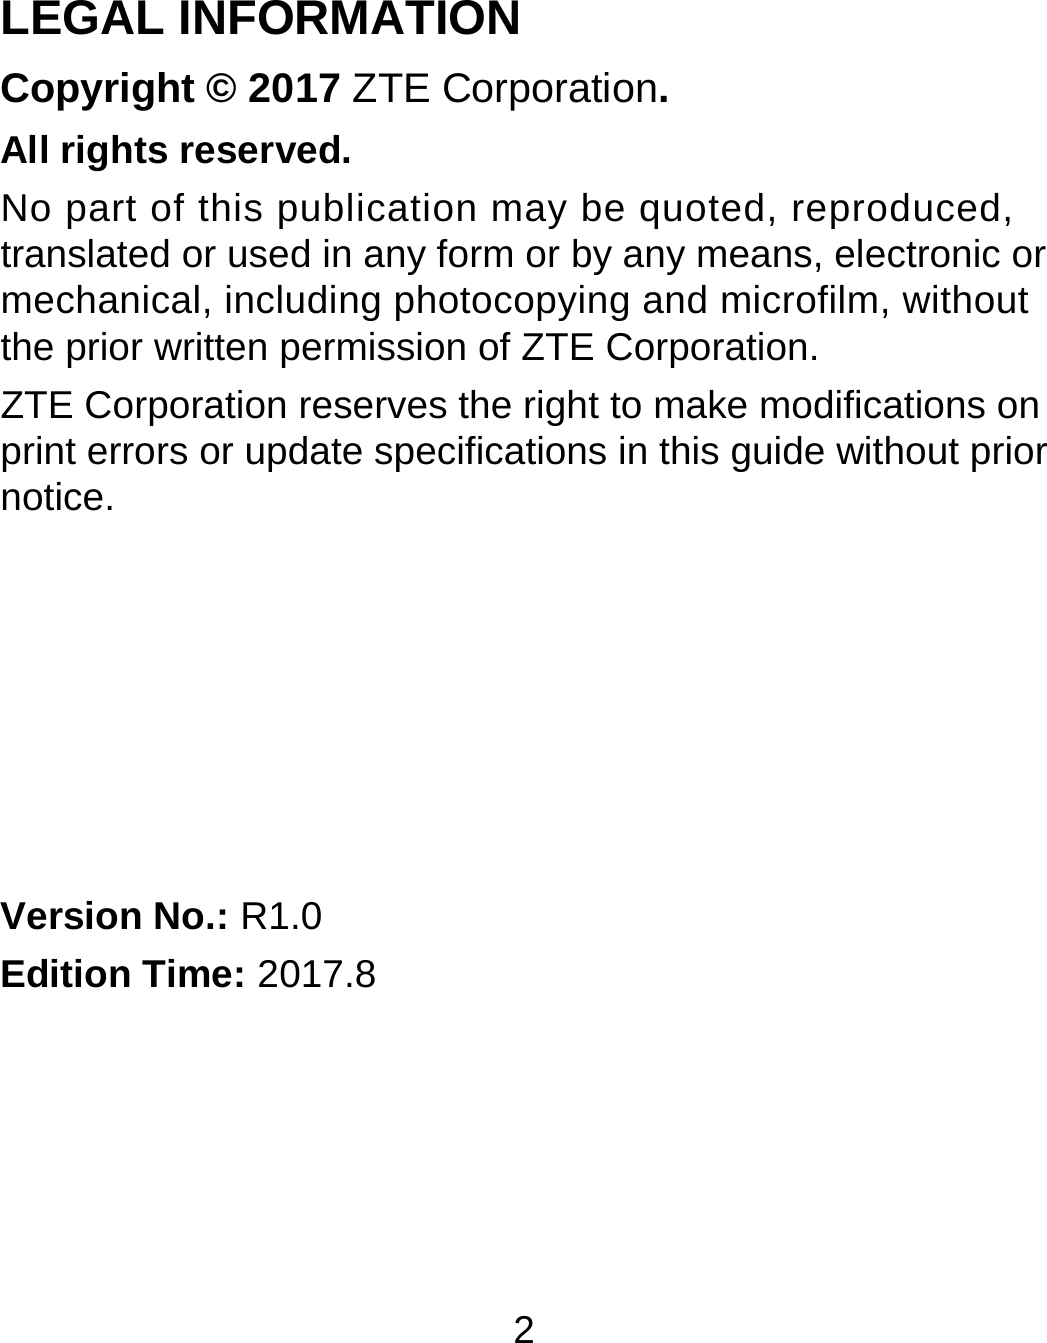 2 LEGAL INFORMATION Copyright © 2017 ZTE Corporation. All rights reserved. No part of this publication may be quoted, reproduced, translated or used in any form or by any means, electronic or mechanical, including photocopying and microfilm, without the prior written permission of ZTE Corporation. ZTE Corporation reserves the right to make modifications on print errors or update specifications in this guide without prior notice.       Version No.: R1.0 Edition Time: 2017.8  